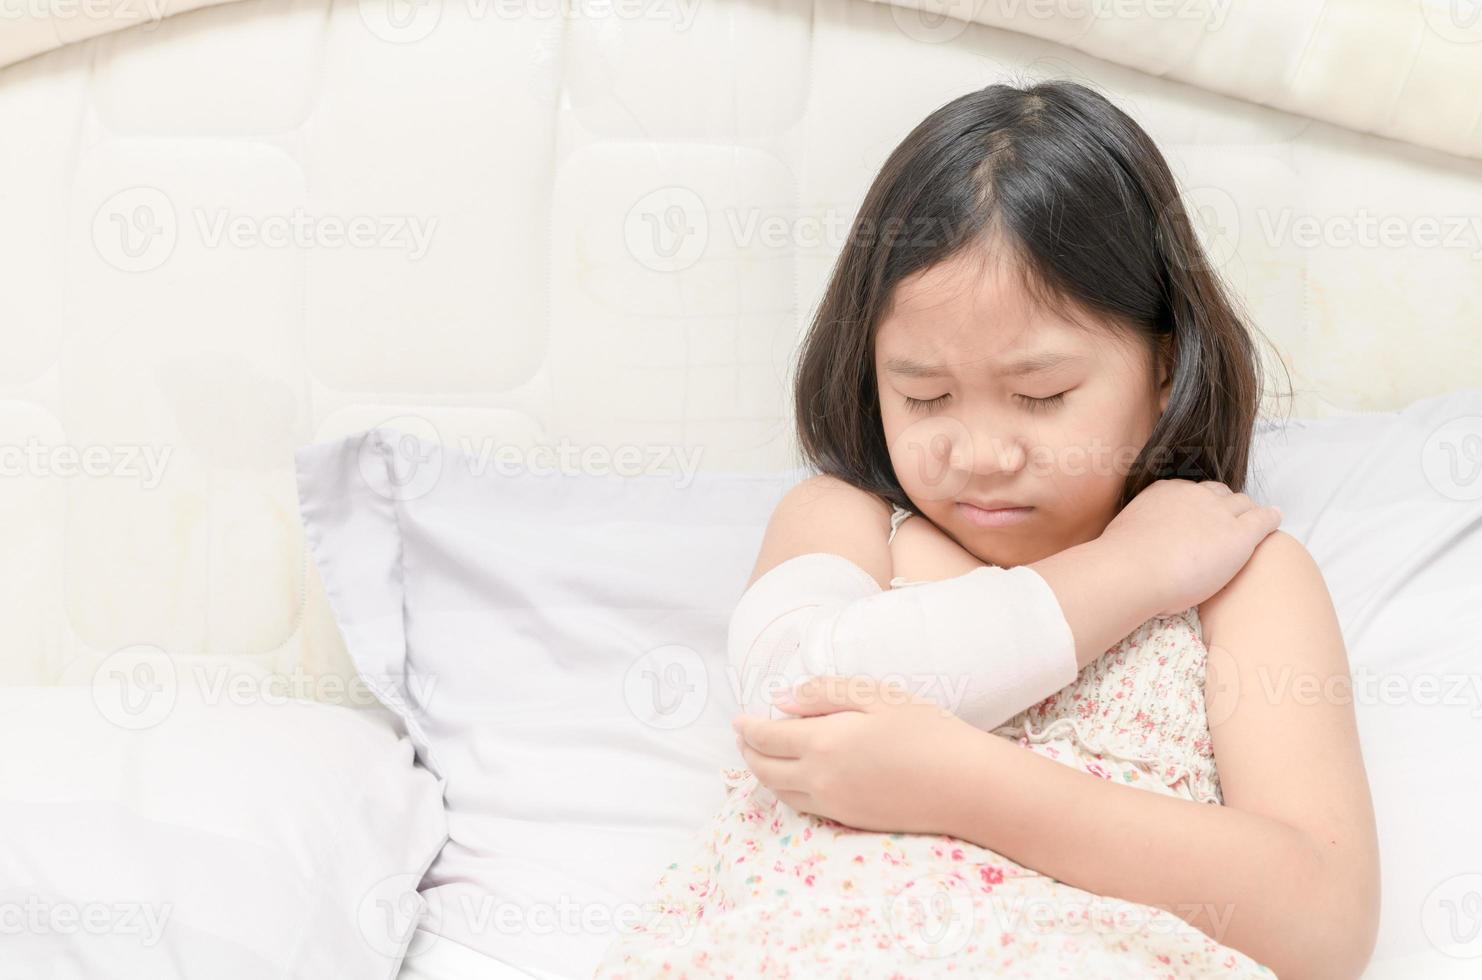 Little girl with her damaged right arm photo